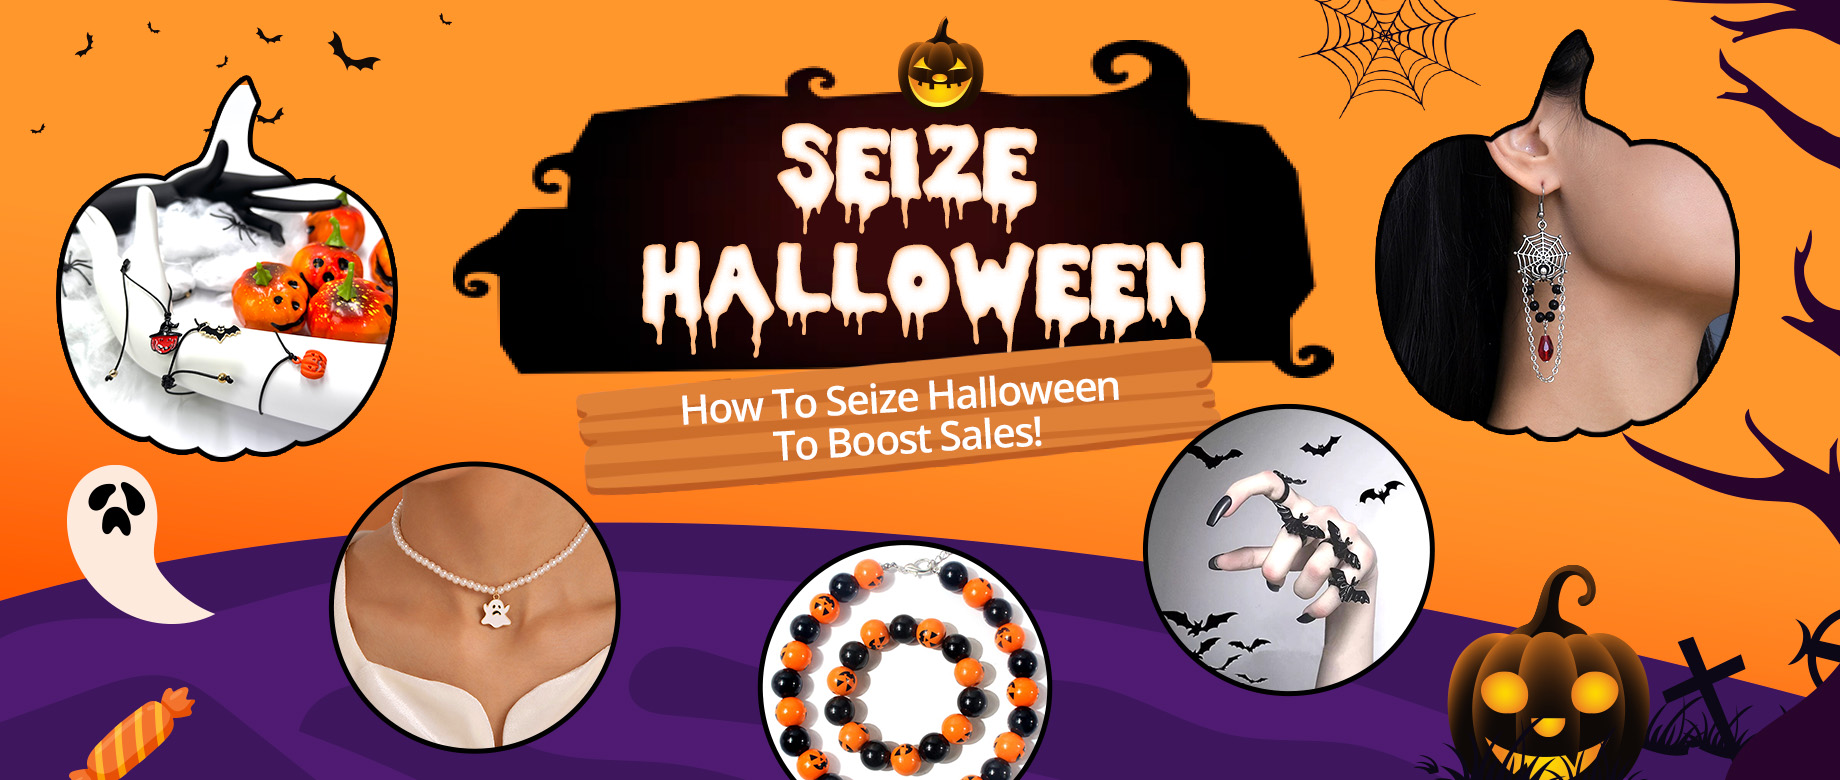 BOO! HOW TO SEIZE HALLOWEEN TO BOOST SALES! ARE YOU READY TO GET SPOOKY?